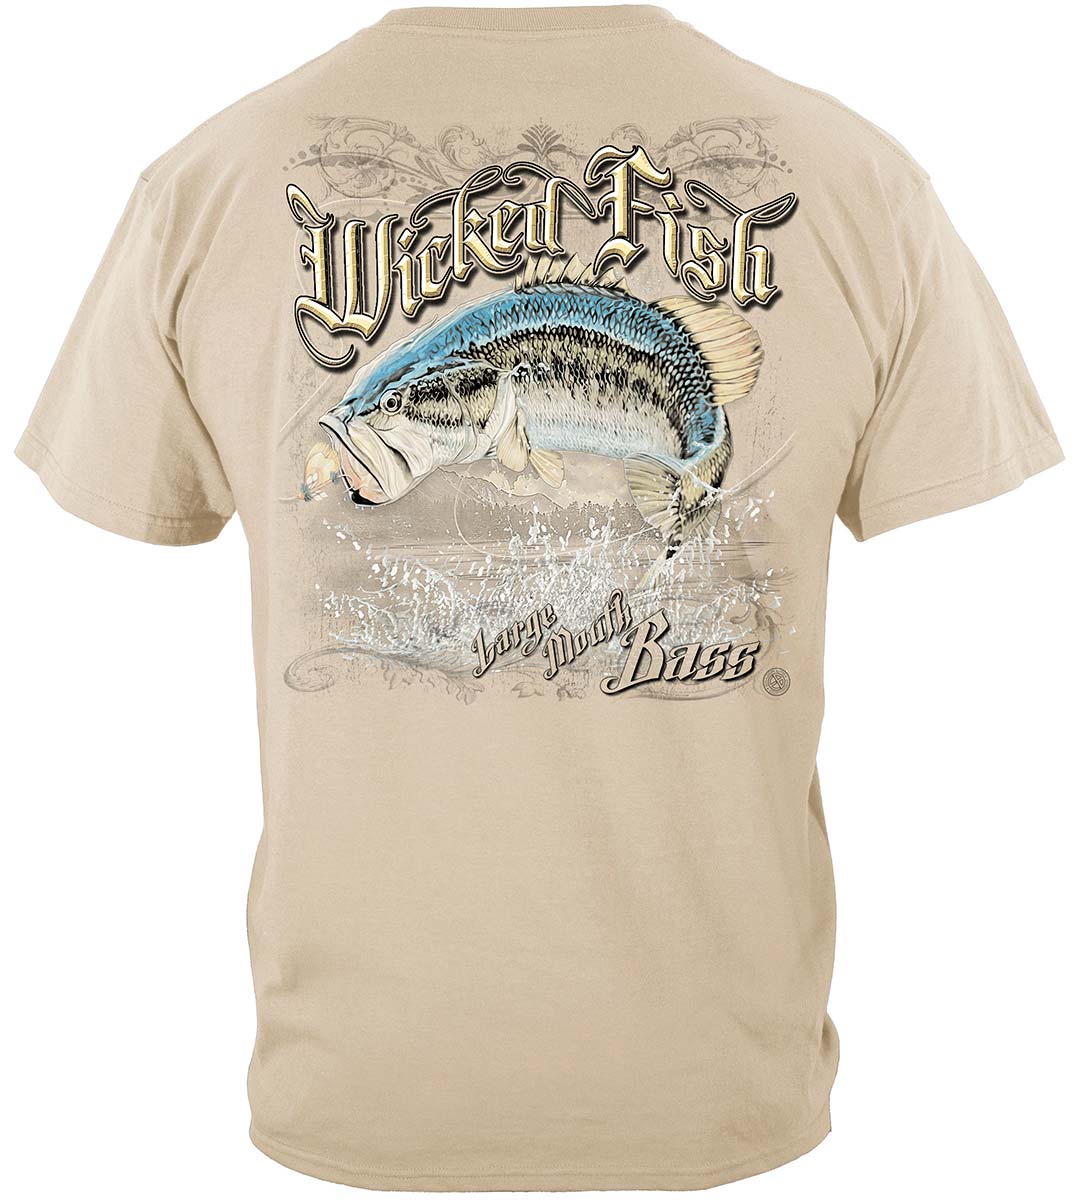 Wicked Fish Vintage Bass T-Shirt, Men's, Size: 4XL